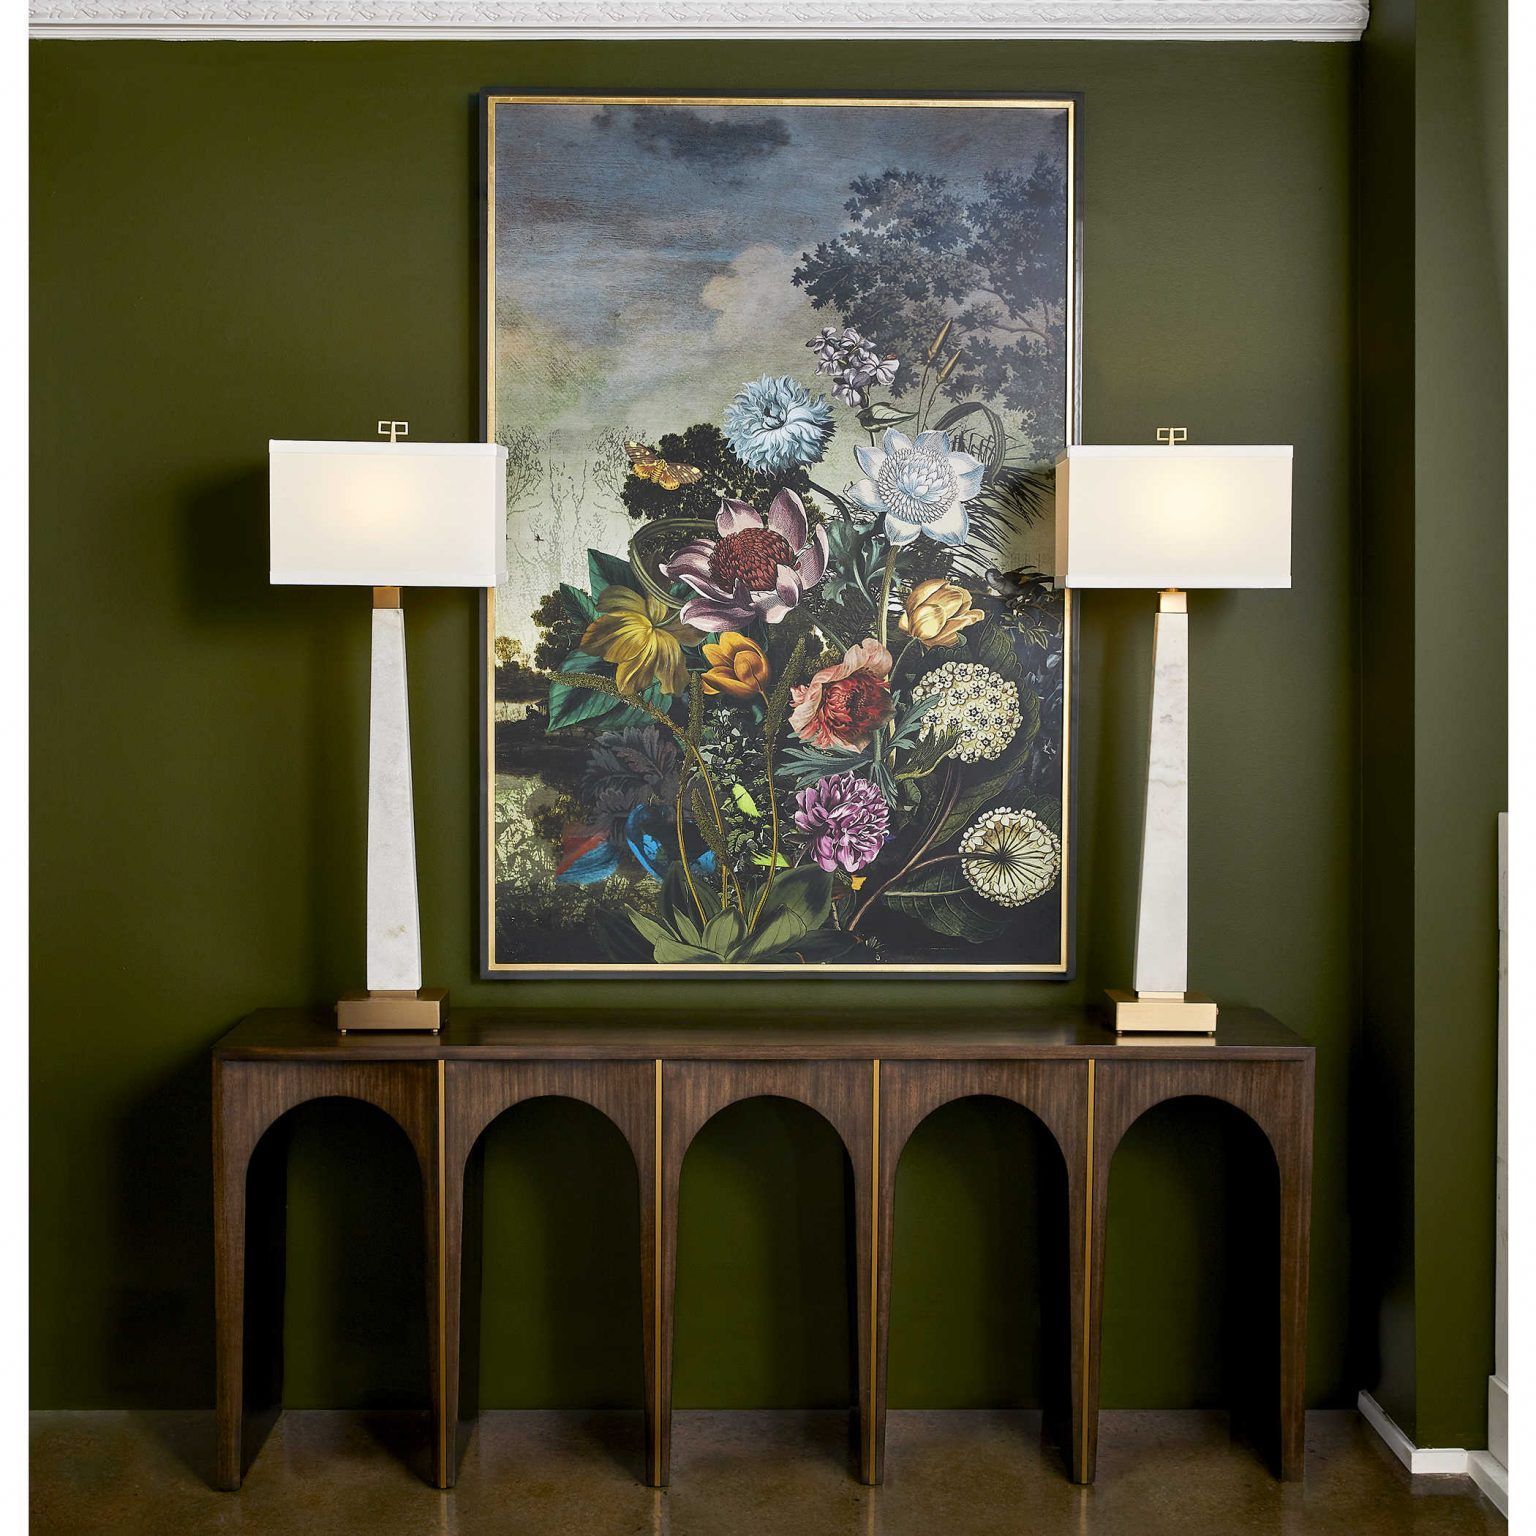 Retro-chic floral print is framed by trendy mid-century lamps and home decor